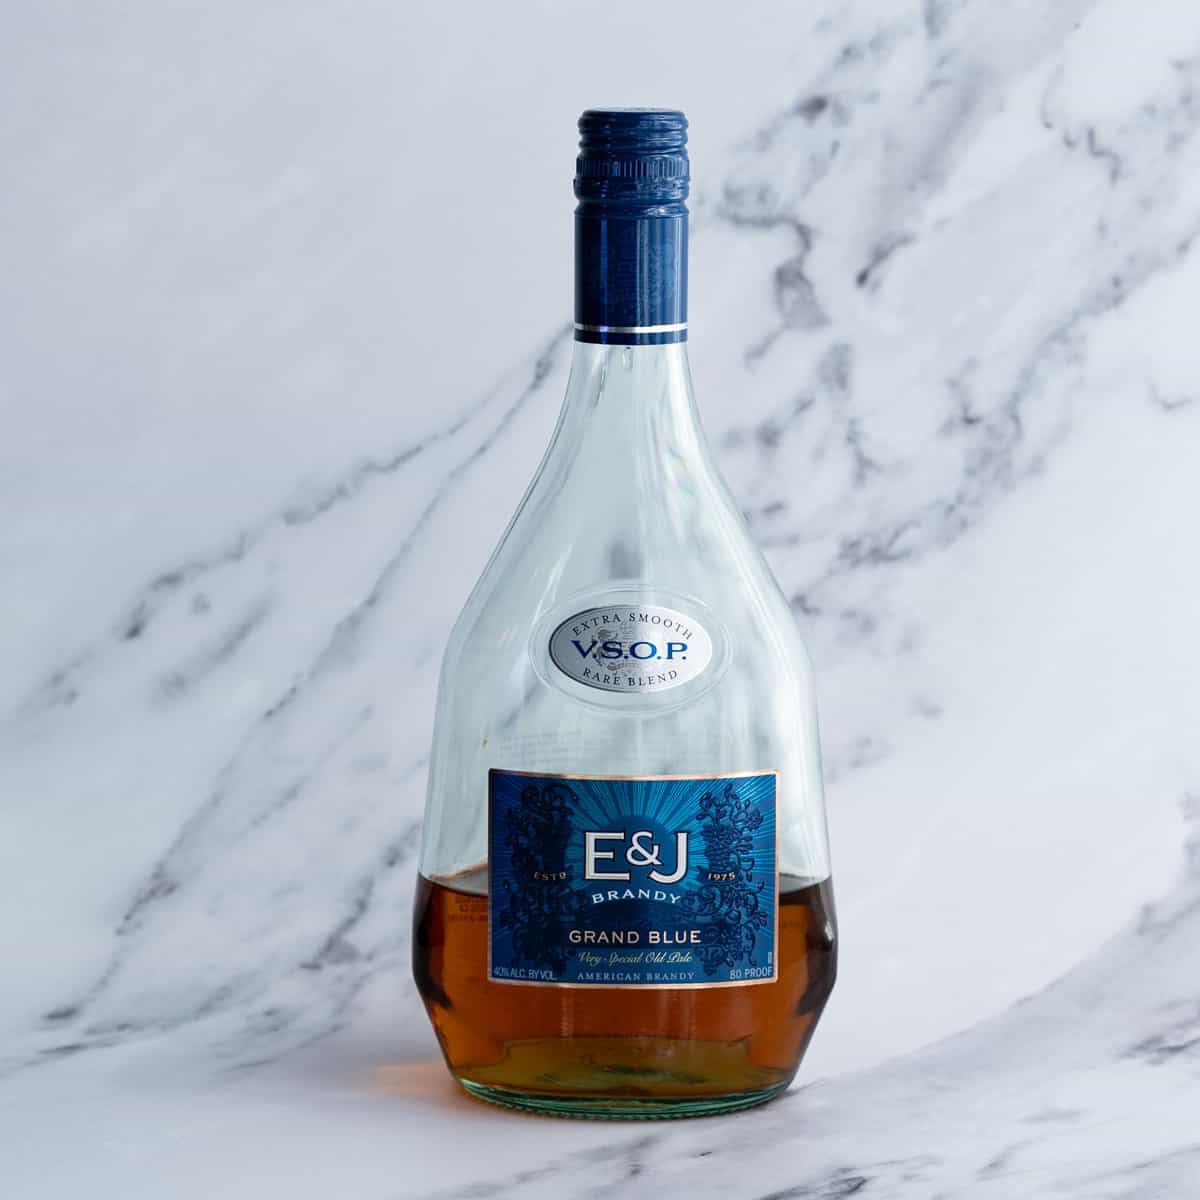 A bottle of brandy sits on a marble countertop.